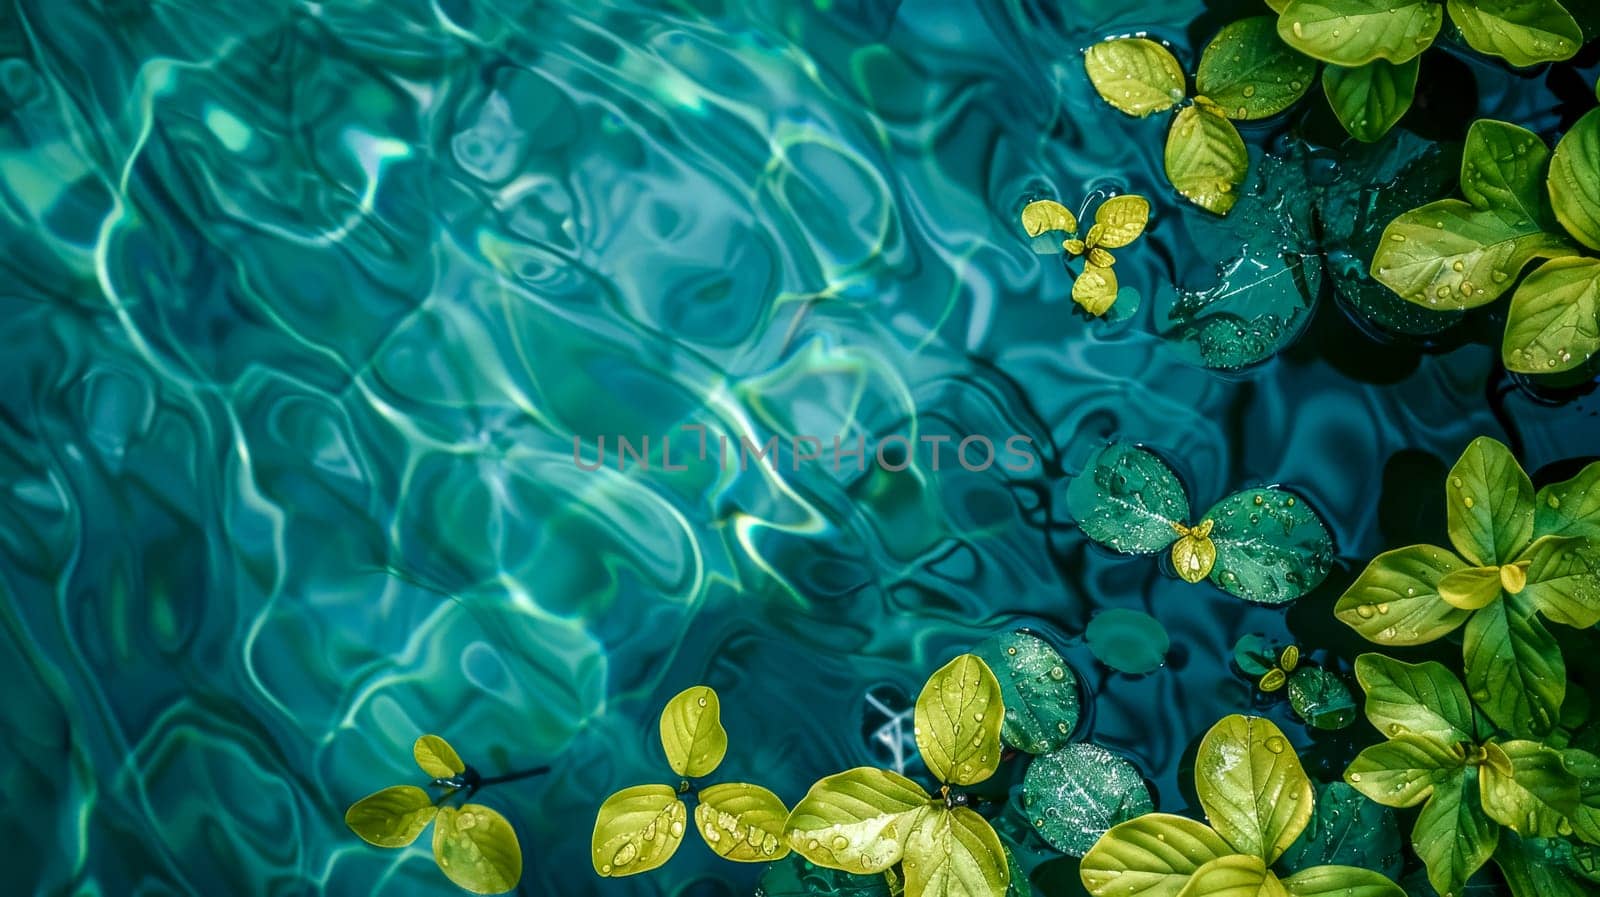 Calm blue water rippling near vibrant green leaves with sunlight reflection